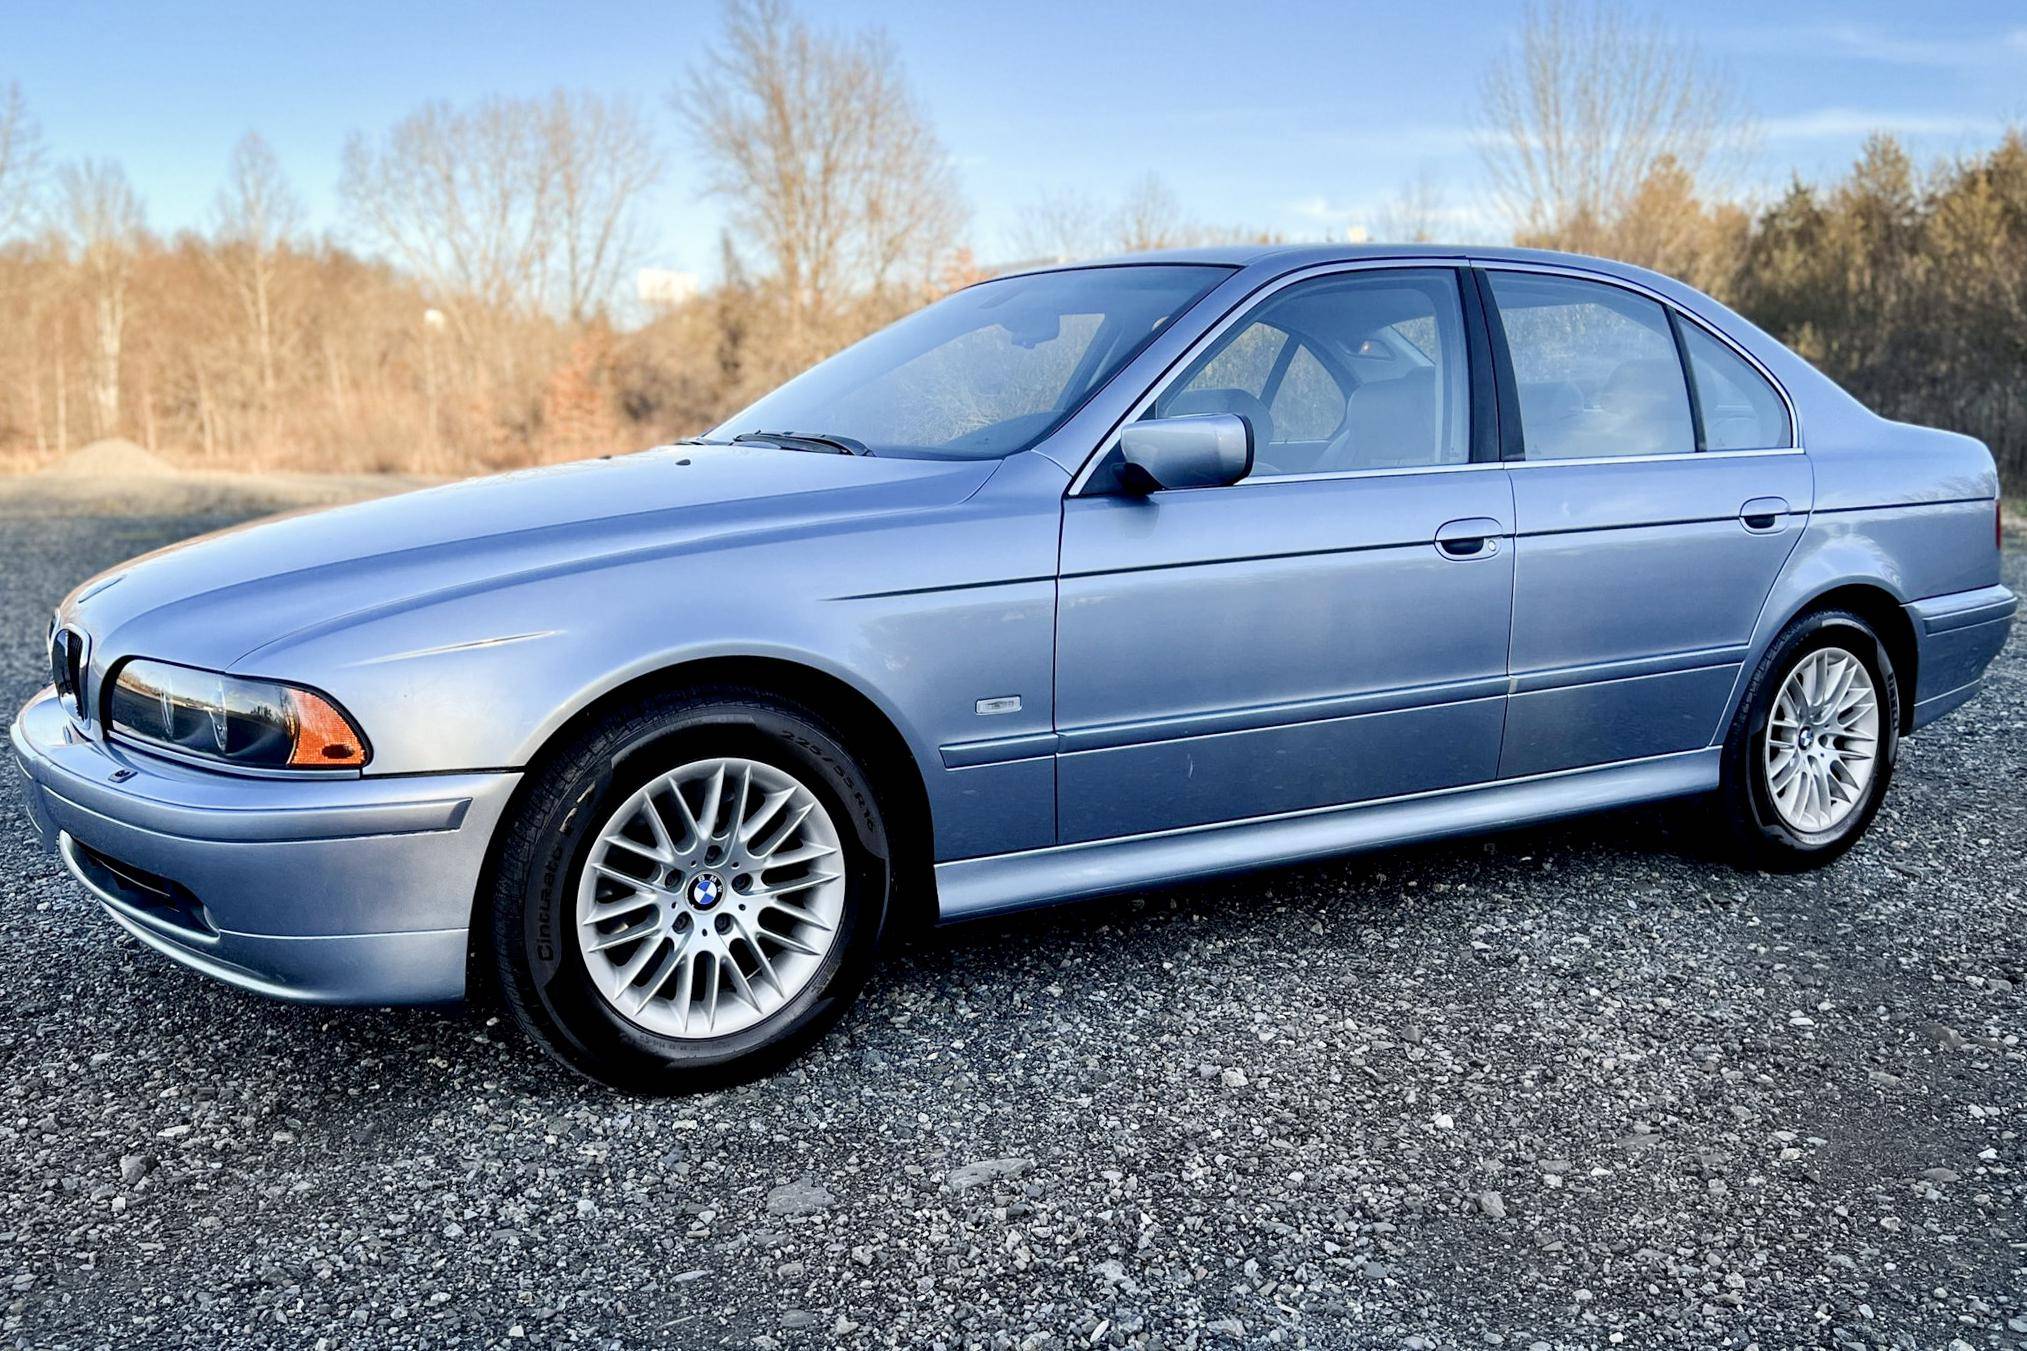 2003 BMW E39 540i Sport Wagon M-Sport - 1 of 189 in the USA